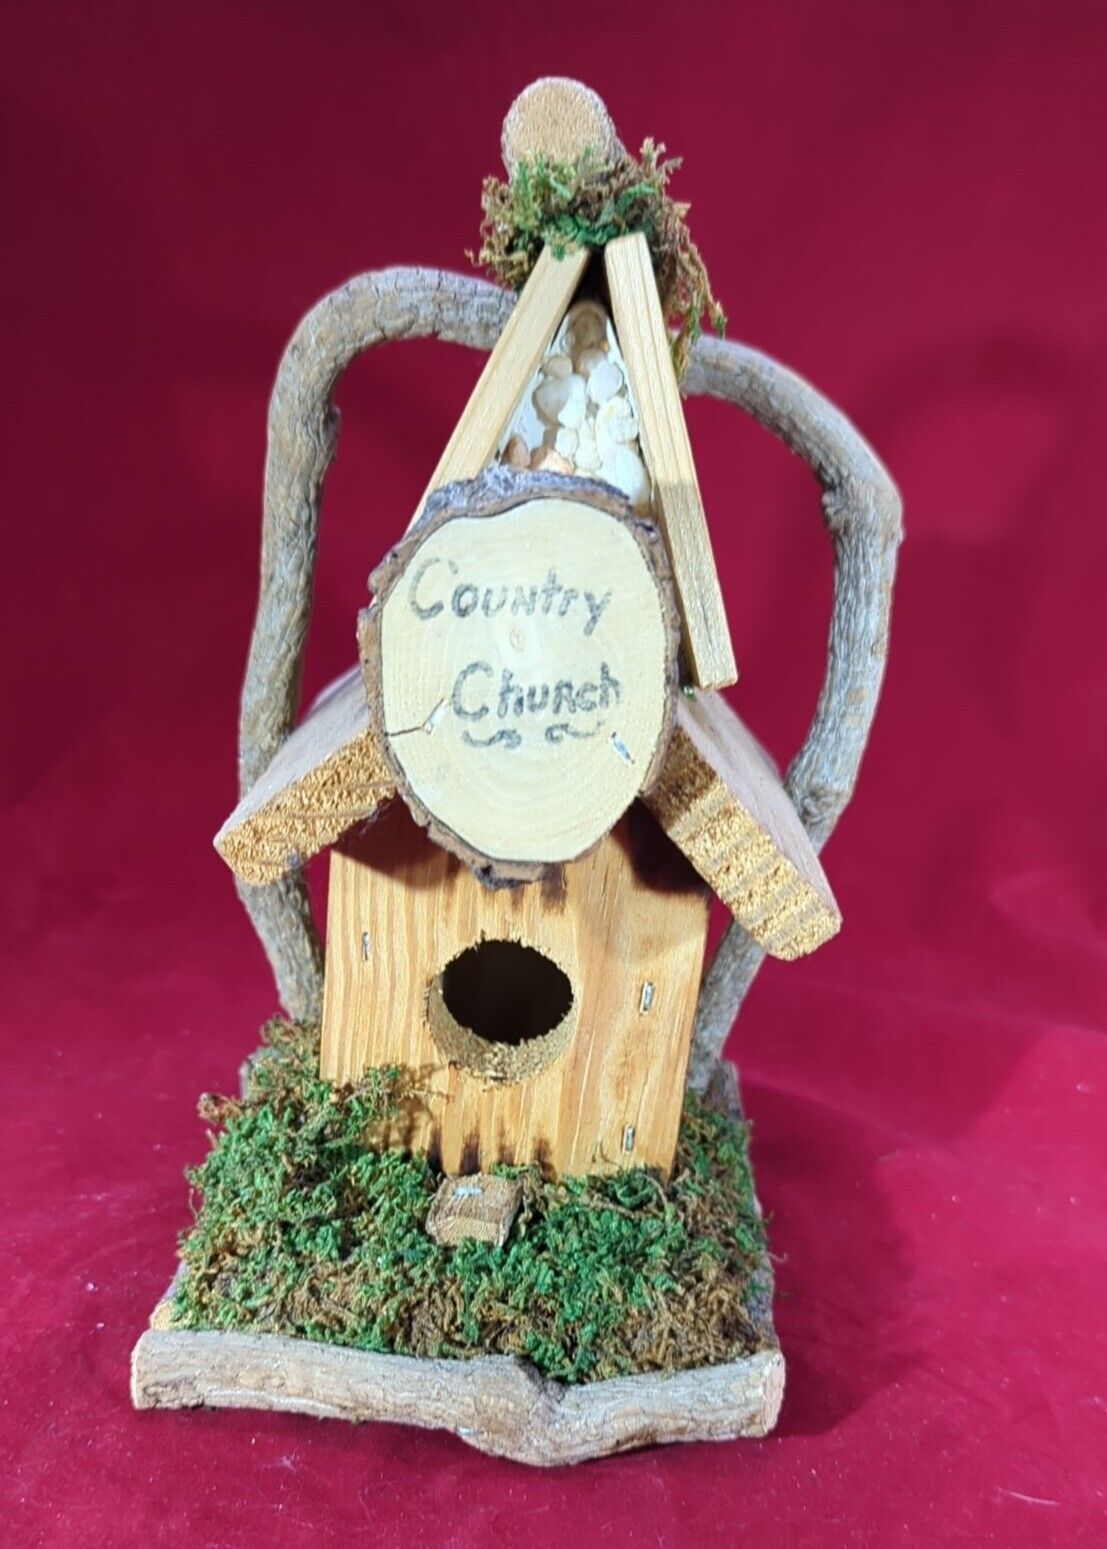 Vintage Primitive Rustic Hand Made Wood County Church Bird House Or Decor 